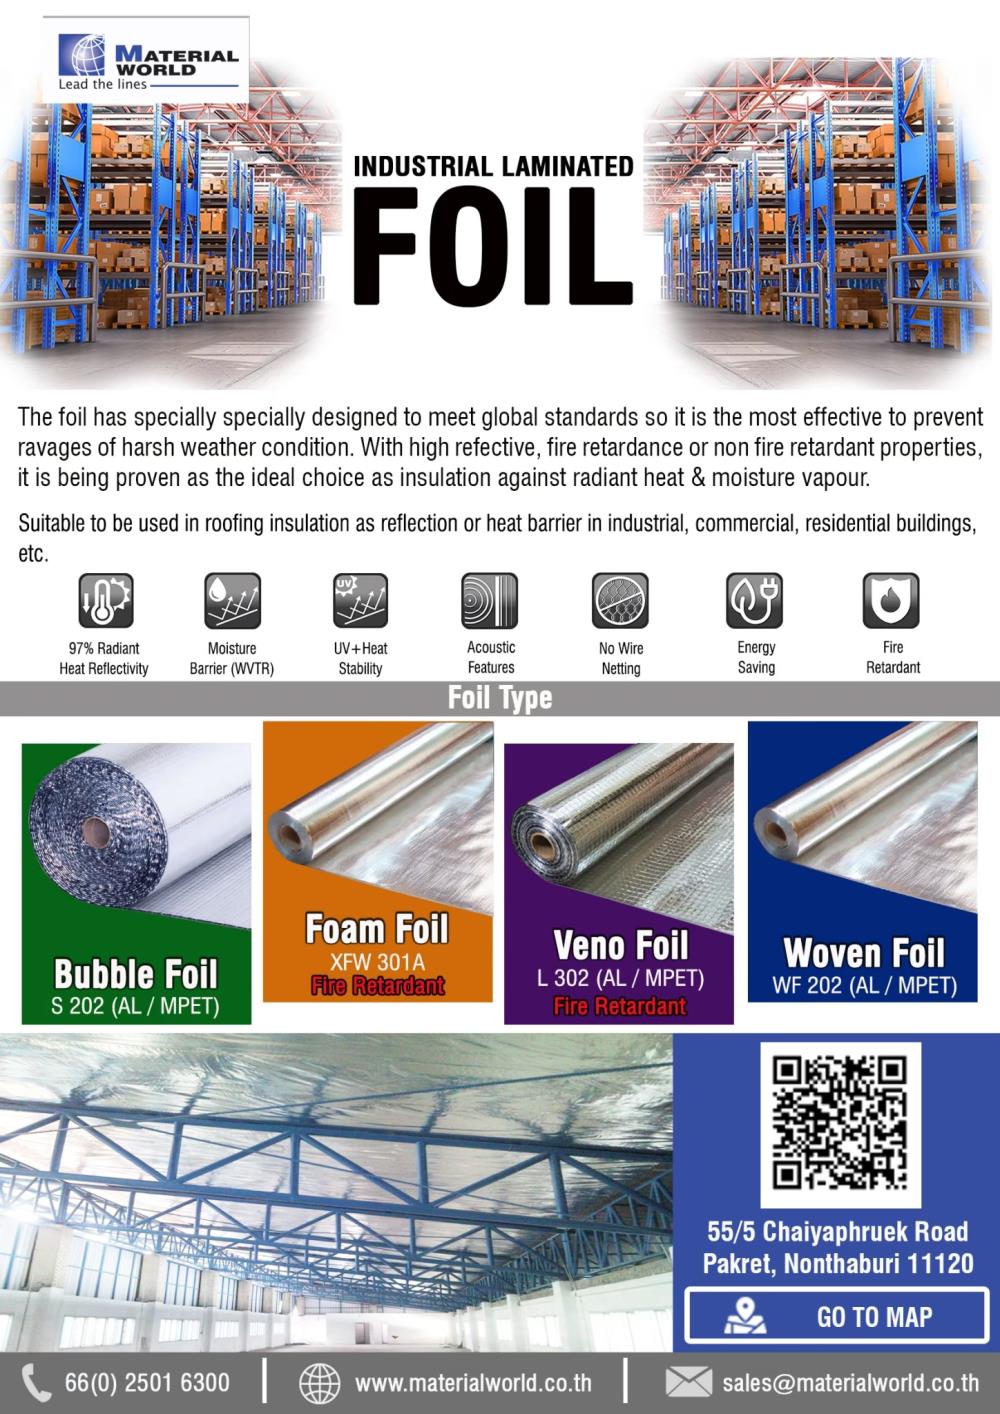 Foil,Packing,Material World,Materials Handling/Packing